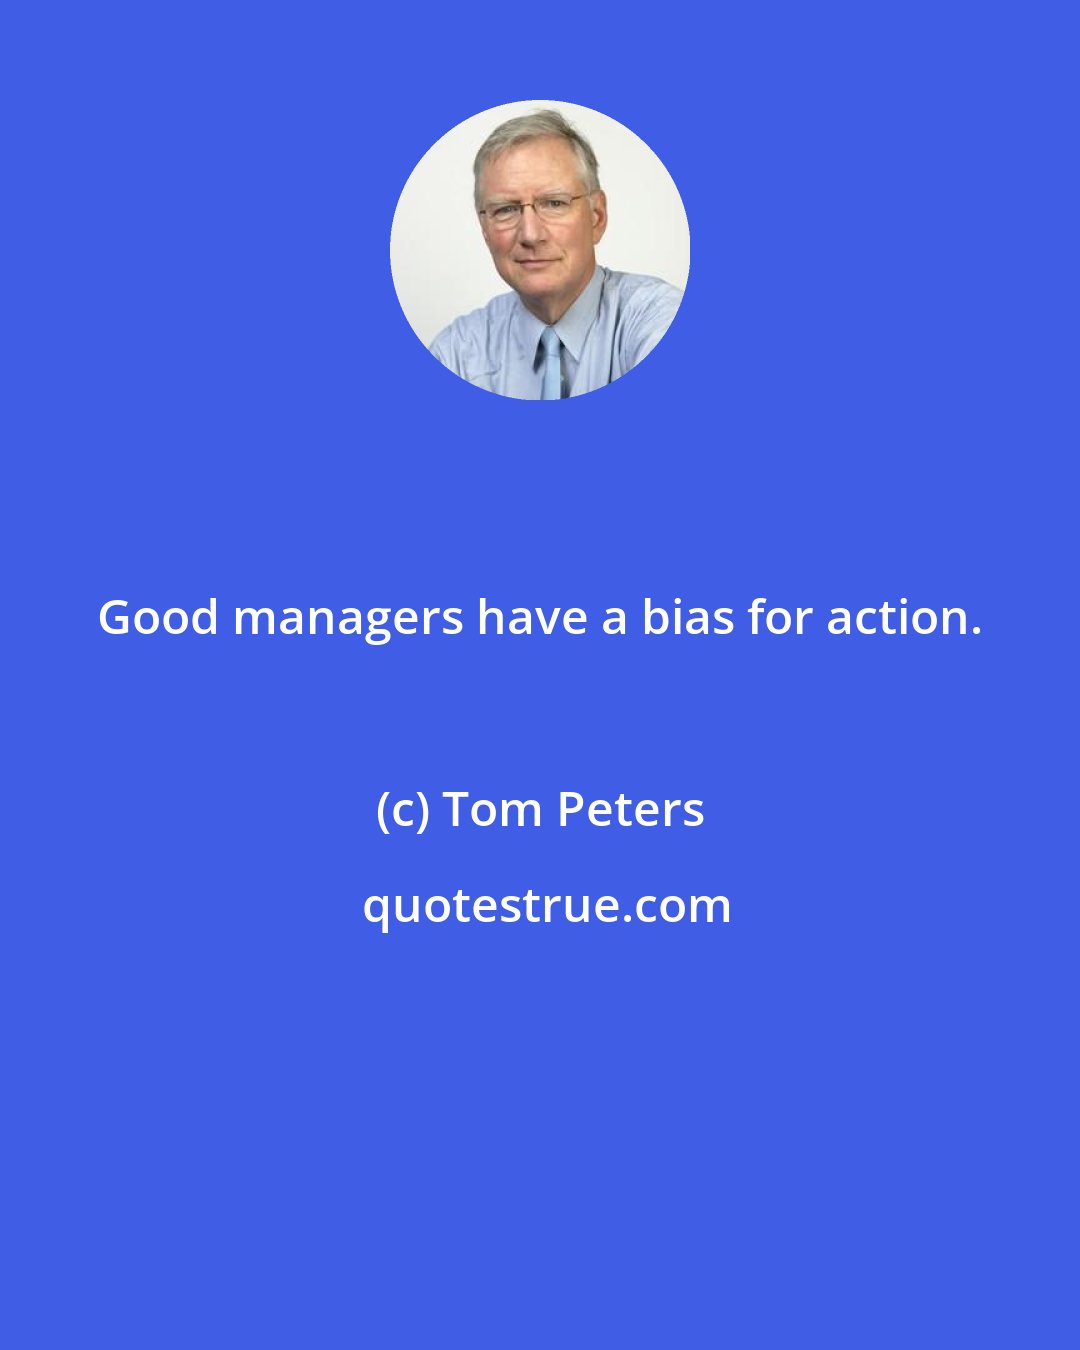 Tom Peters: Good managers have a bias for action.